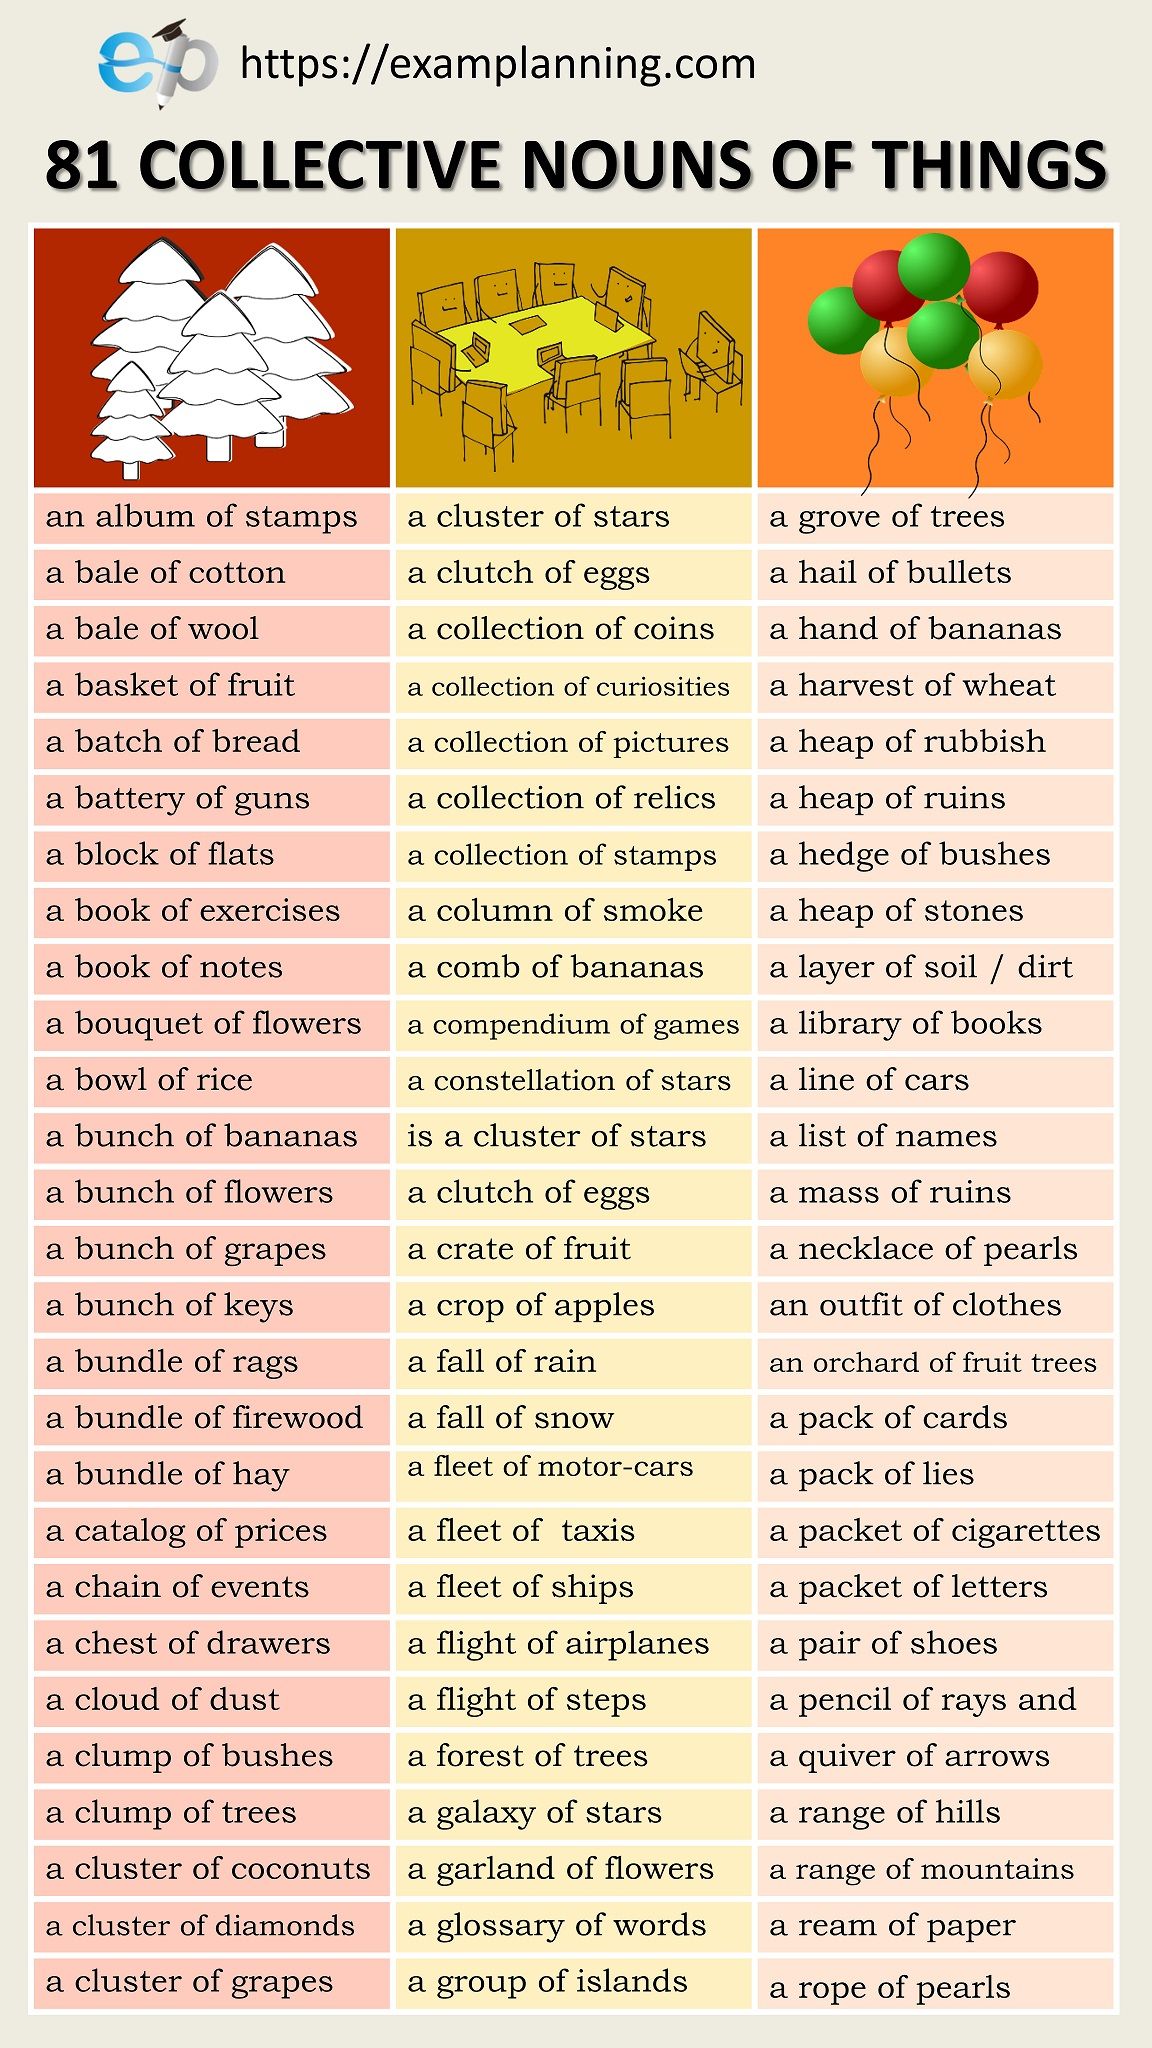 81 Collective Nouns of Things